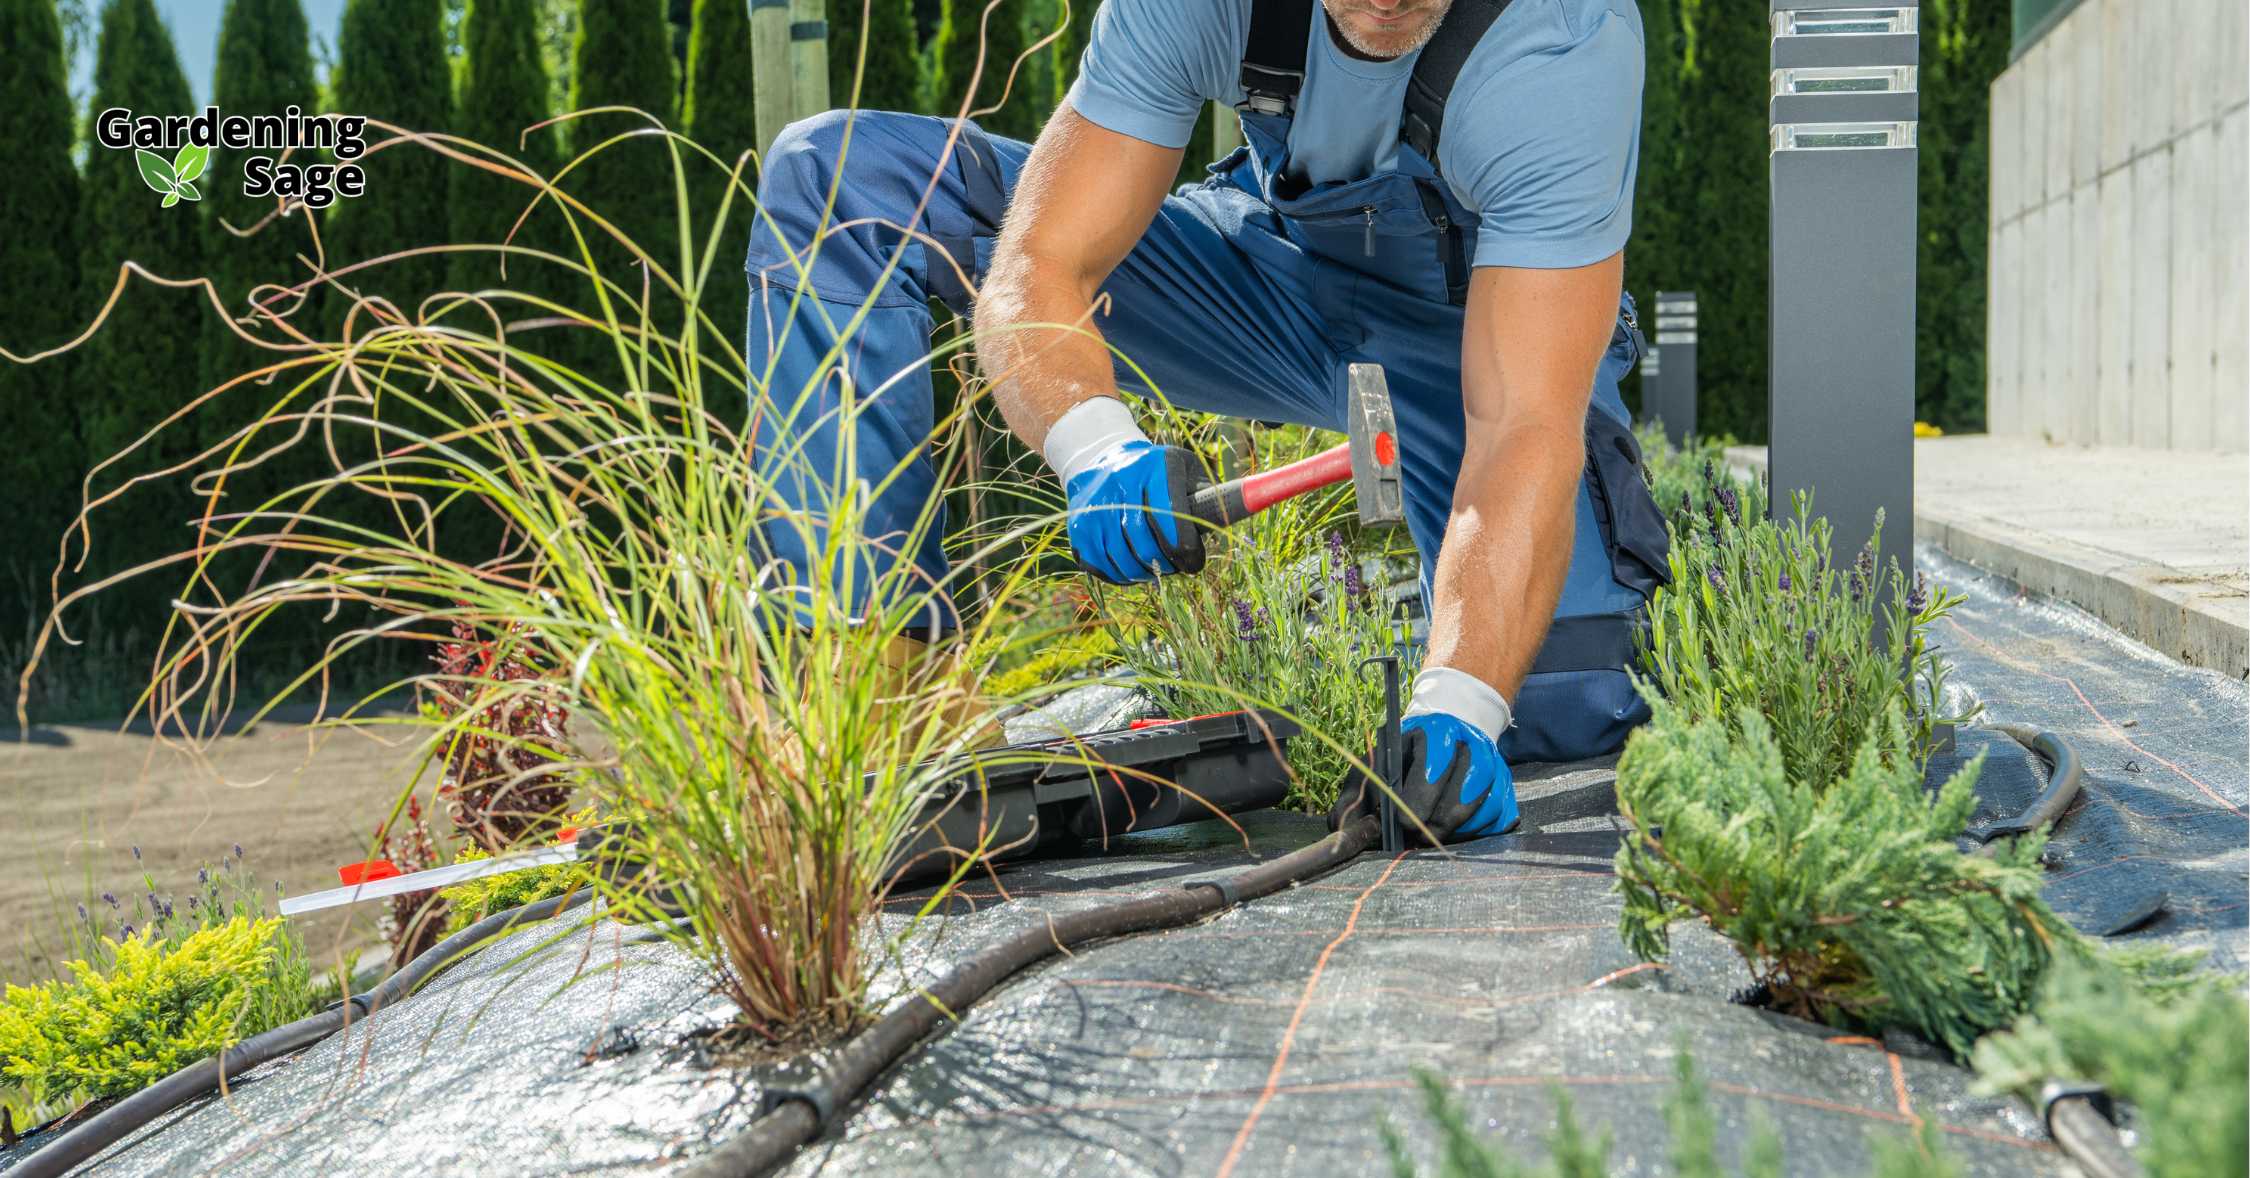 Gardener installing an efficient irrigation system in a garden, demonstrating smart water-wise gardening techniques to conserve water while maintaining plant health.